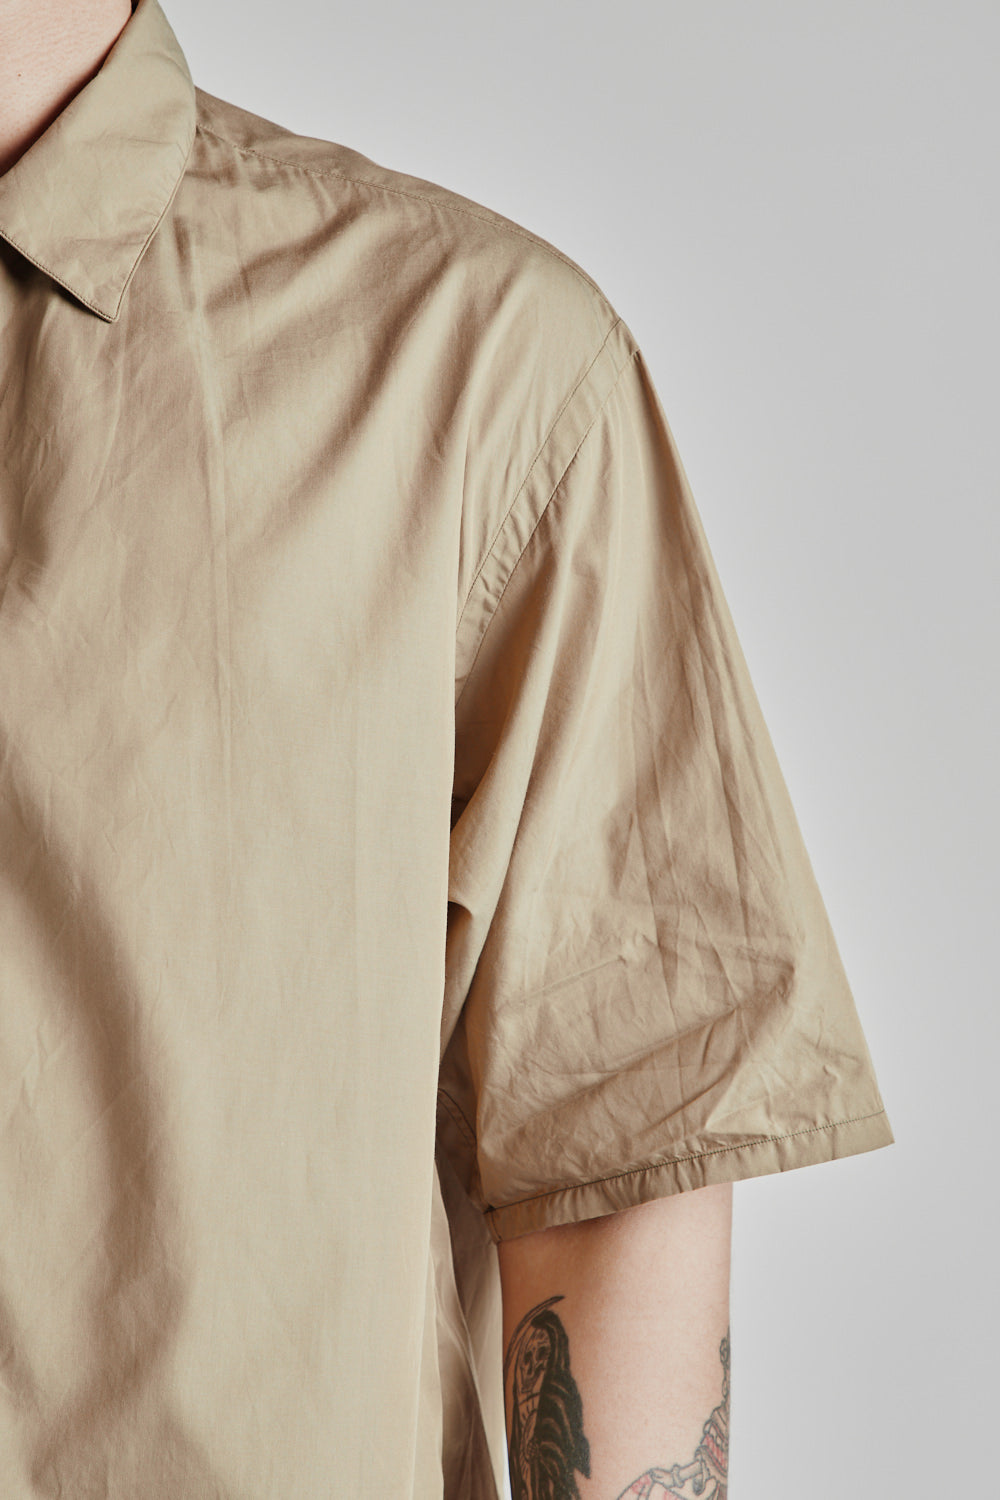 Blurhms Chambray Open Collar Shirt in Olive Beige